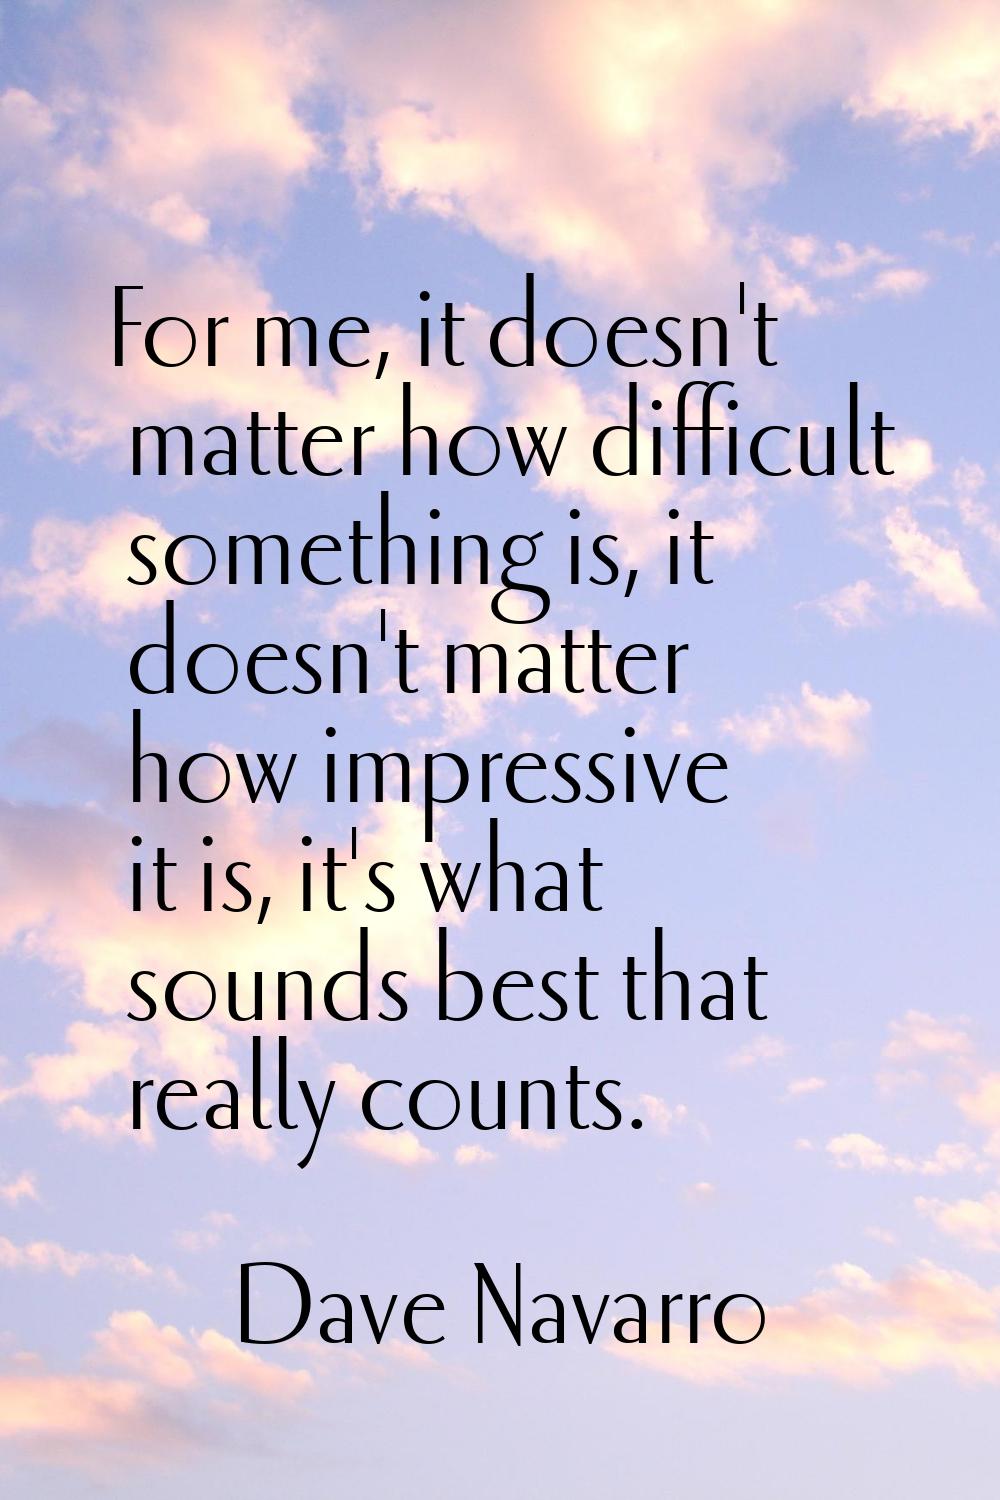 For me, it doesn't matter how difficult something is, it doesn't matter how impressive it is, it's 